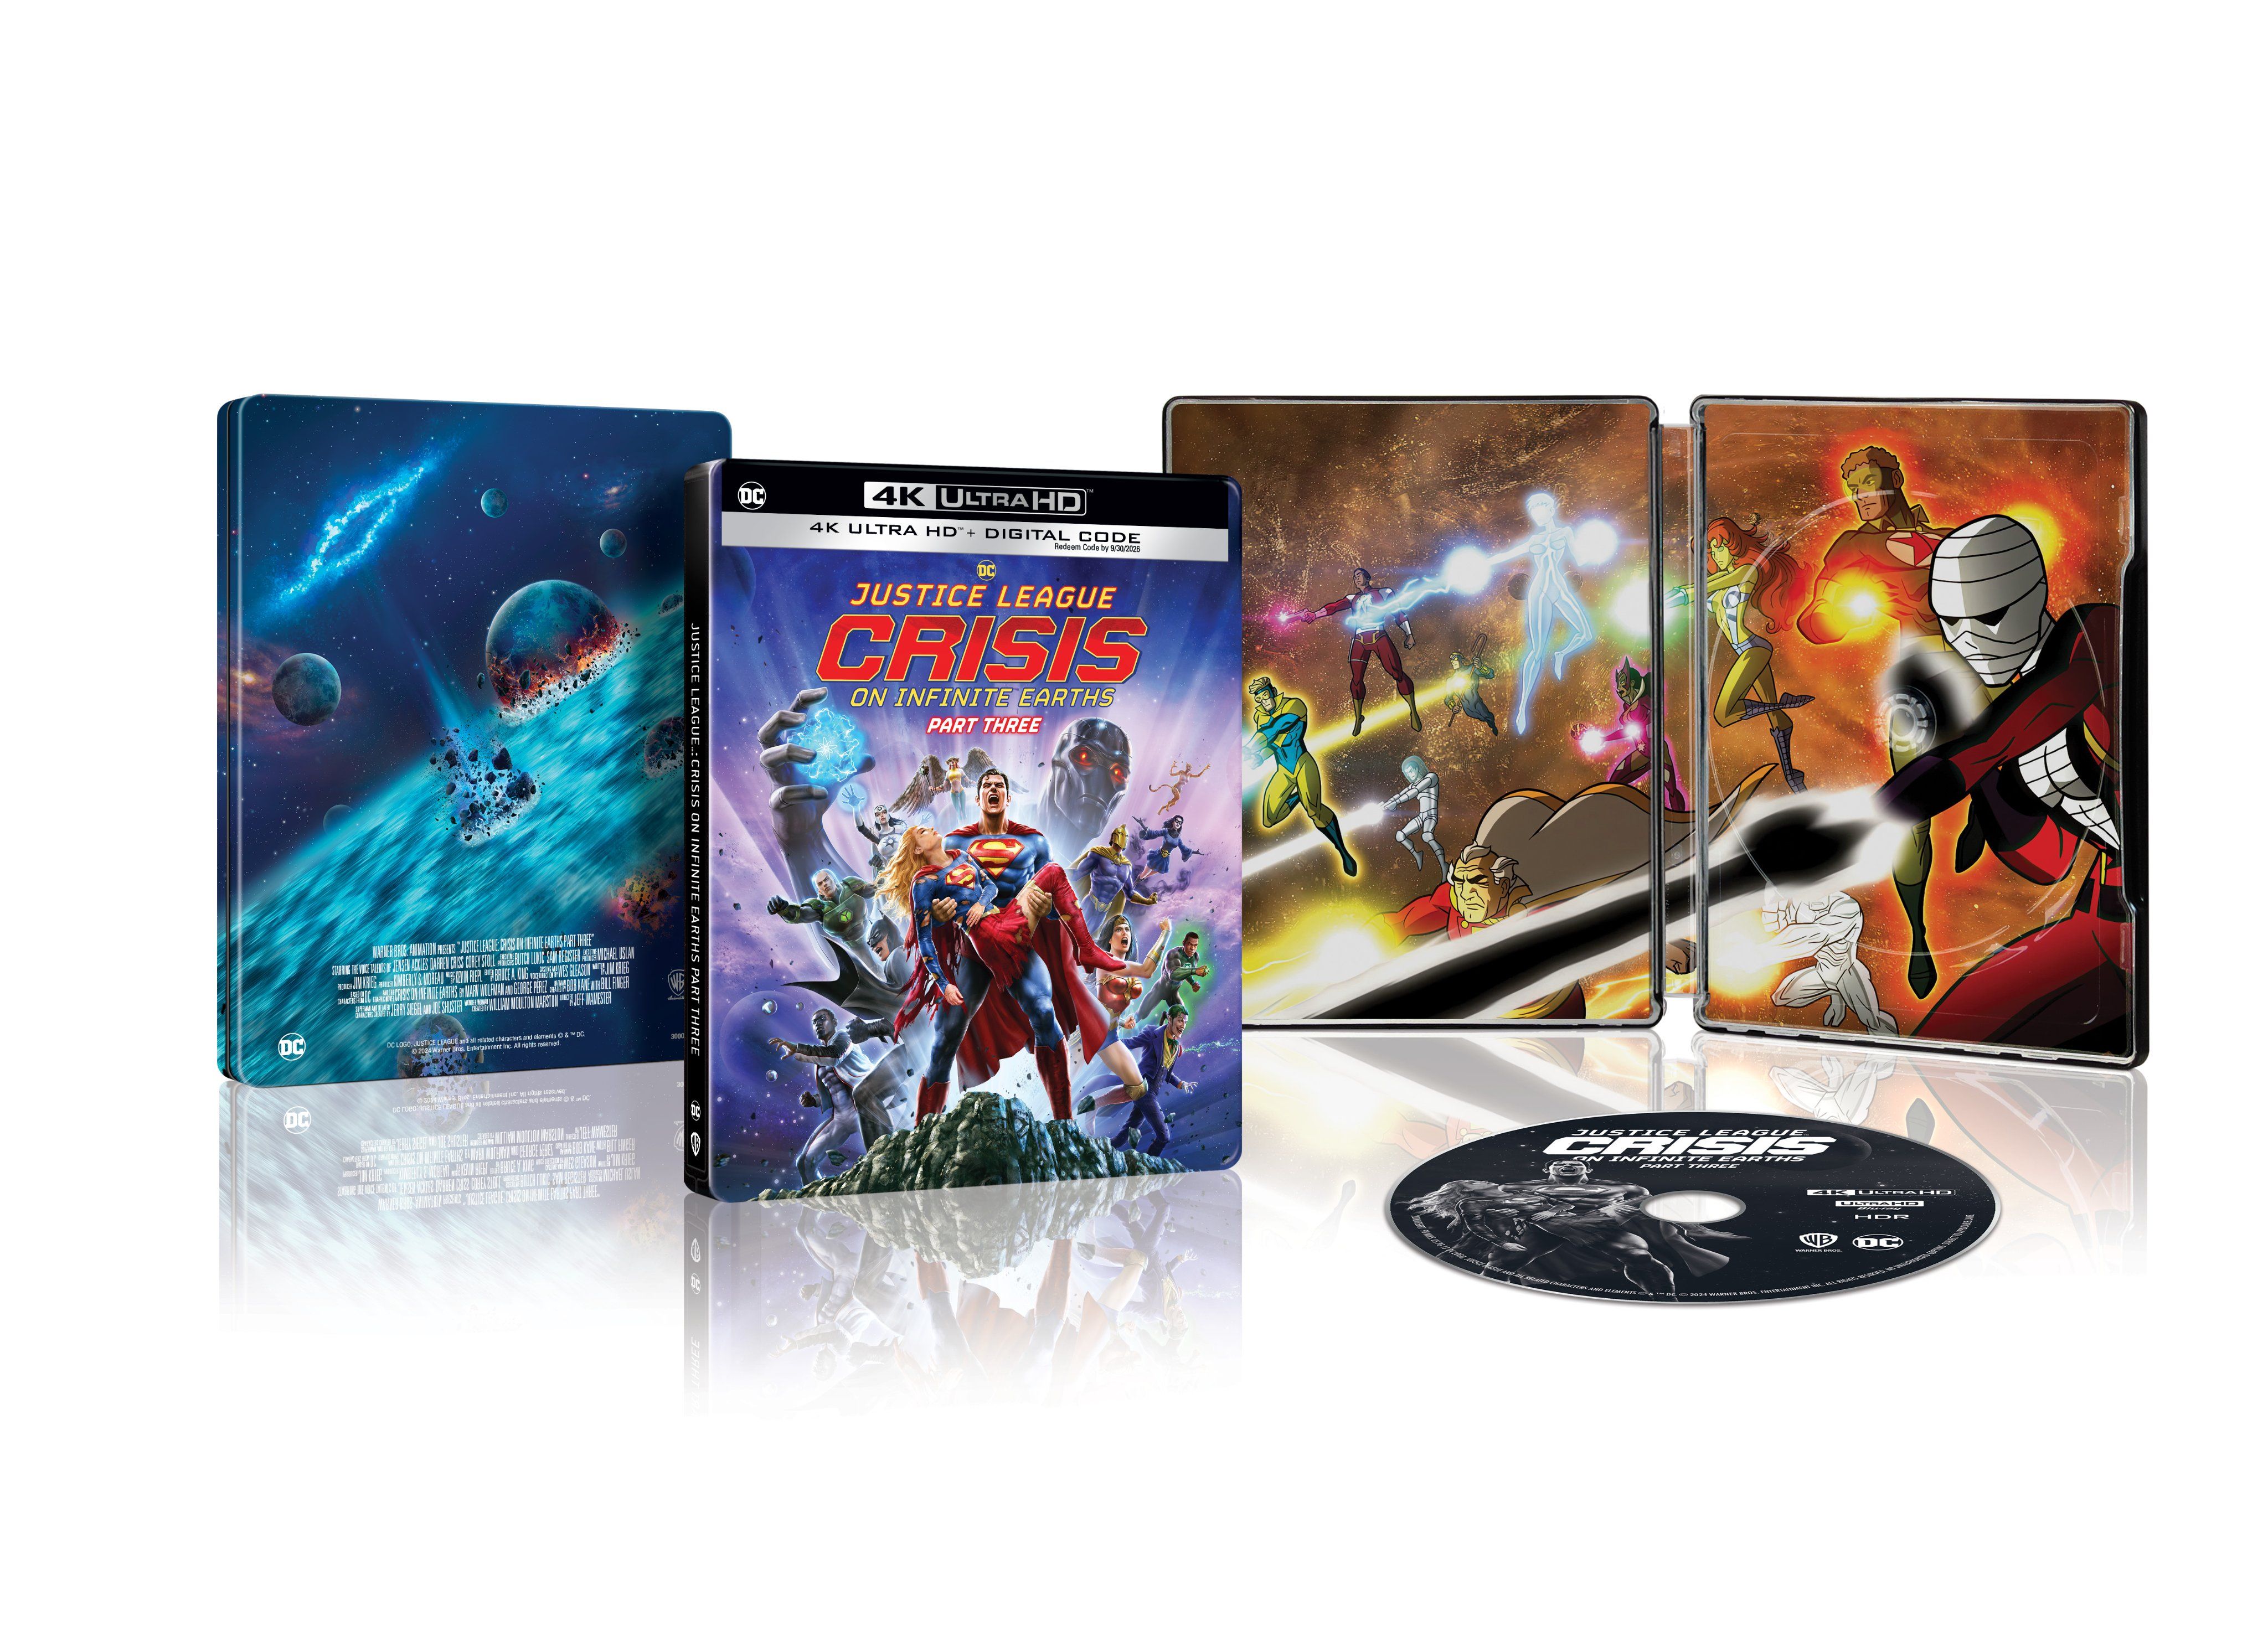 The 4K UHD steelbook packaging for Justice League: Crisis on Infinite Earths - Part Three.